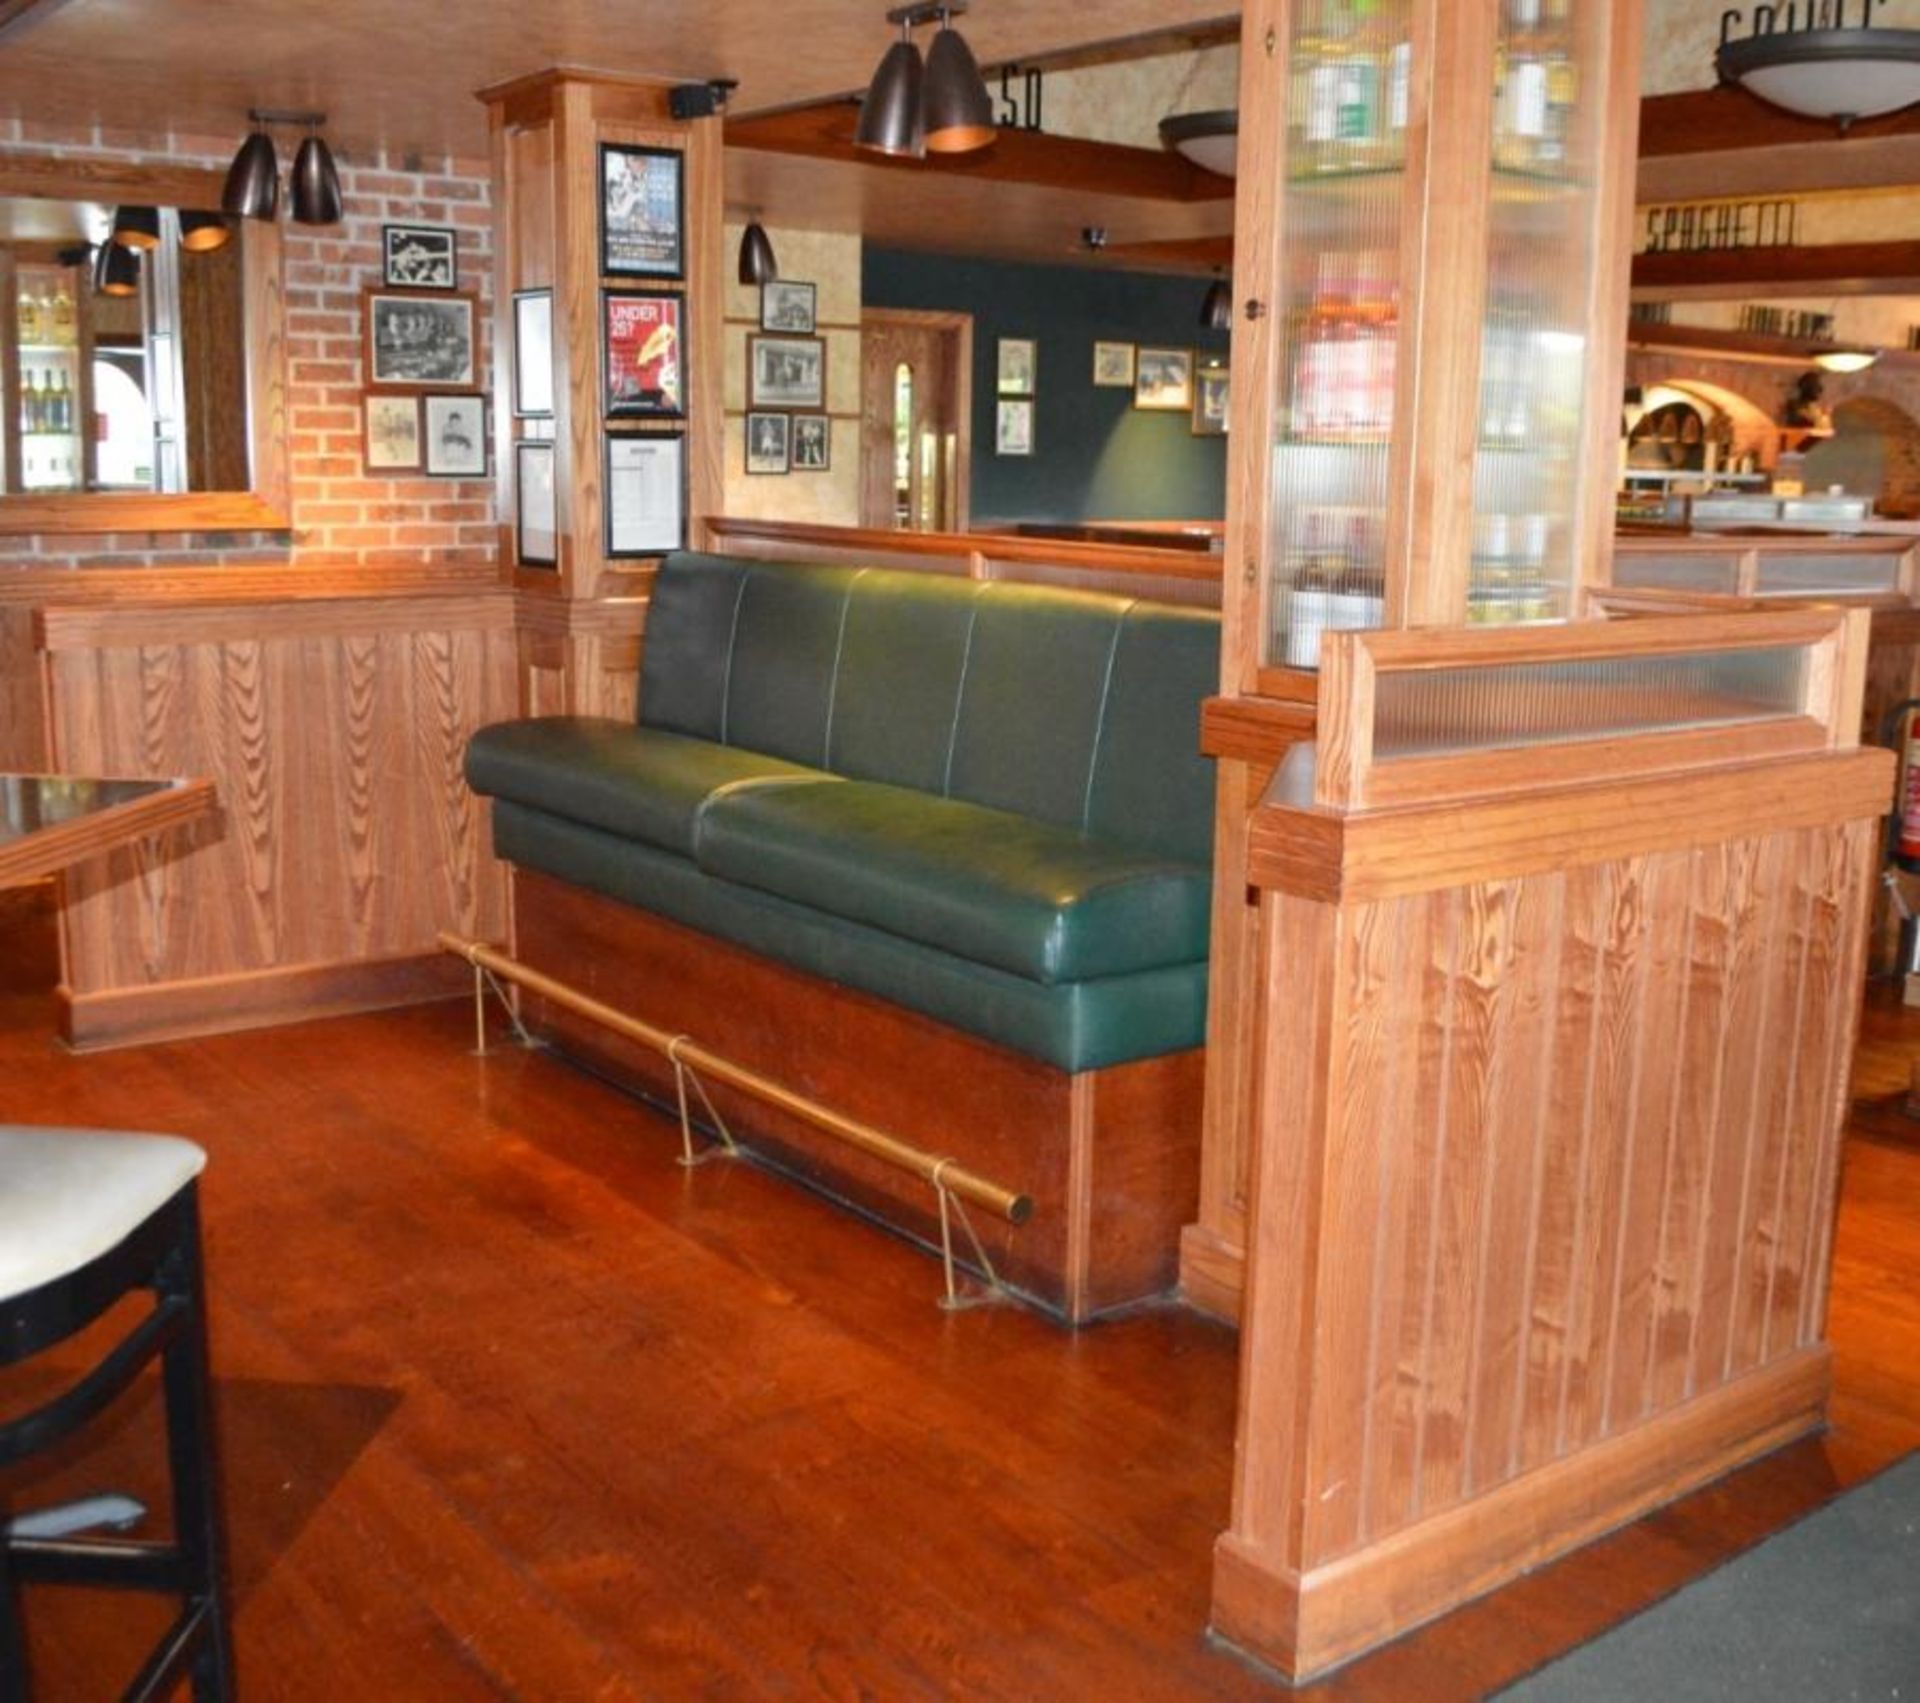 1 x Bar Restaurant Room Partition With Seating Bench, Pillar, Wine Cabinet and Foot Rest - Overall S - Image 8 of 21